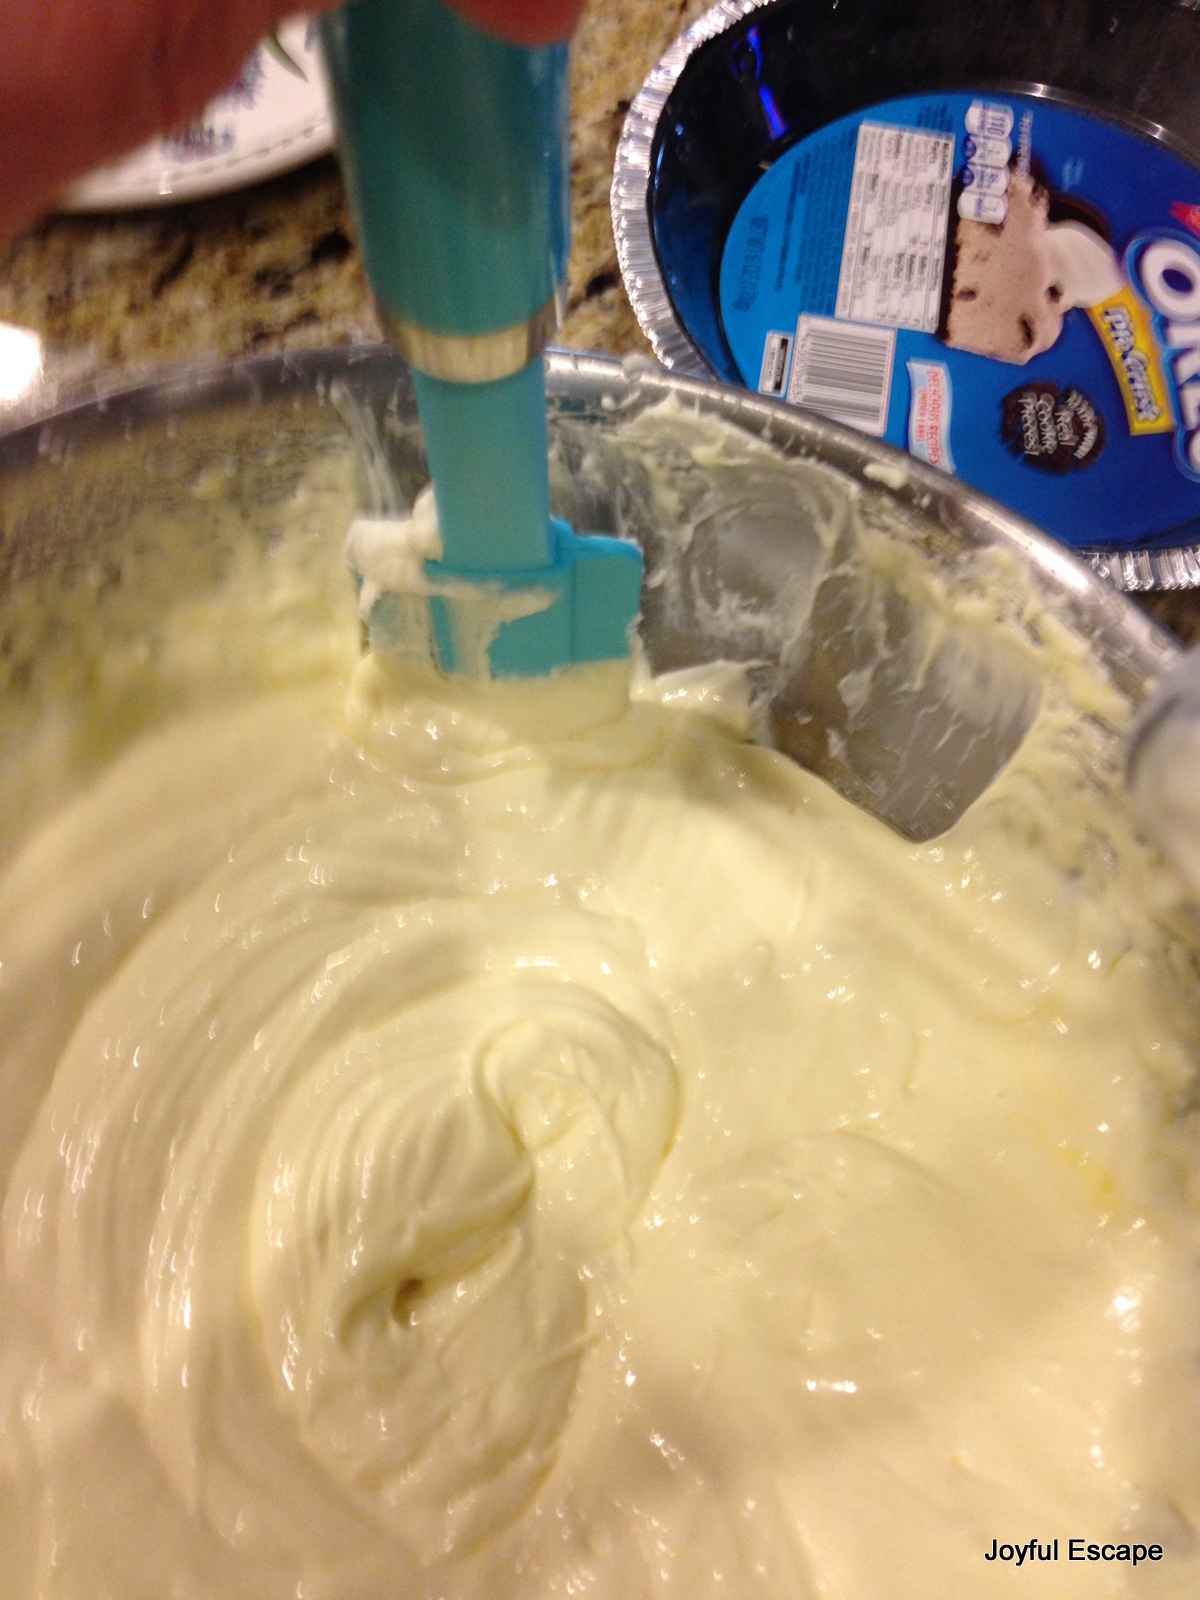 Use spatula to scrap down side of mixing bowl several time during mixing.